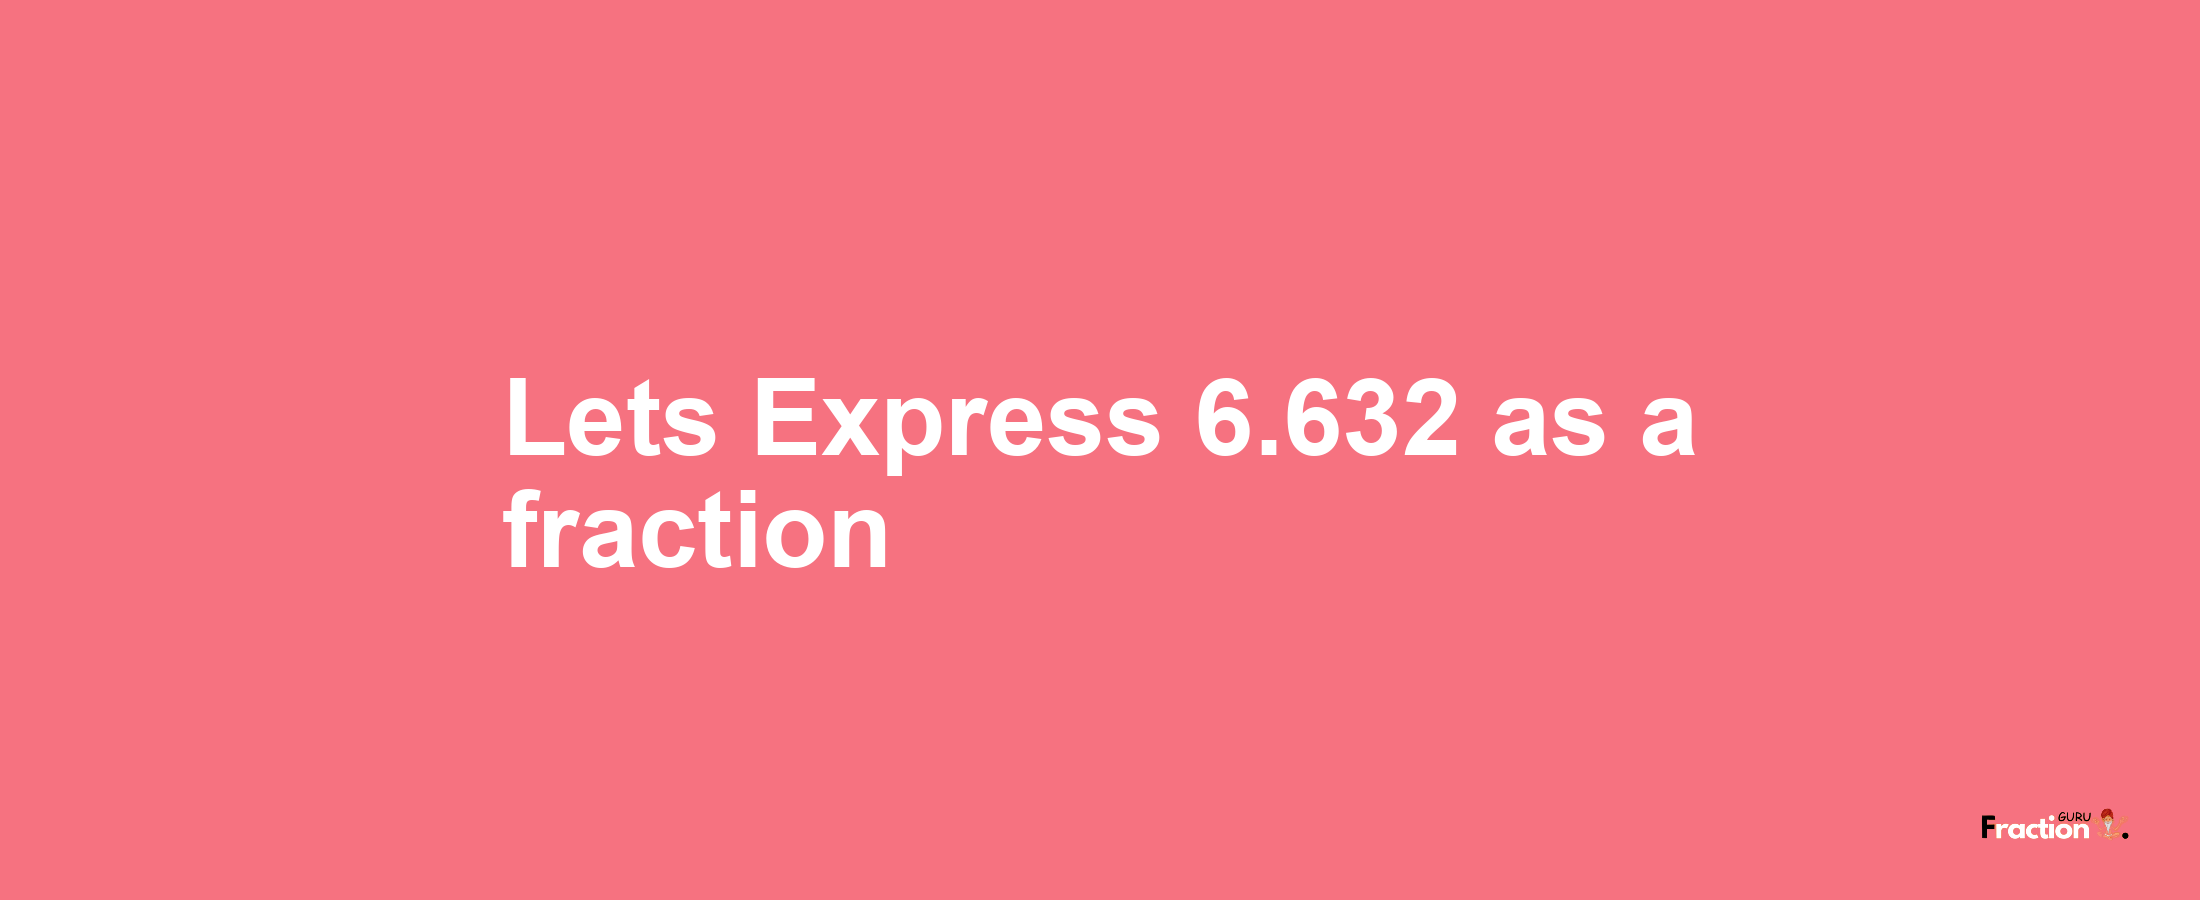 Lets Express 6.632 as afraction